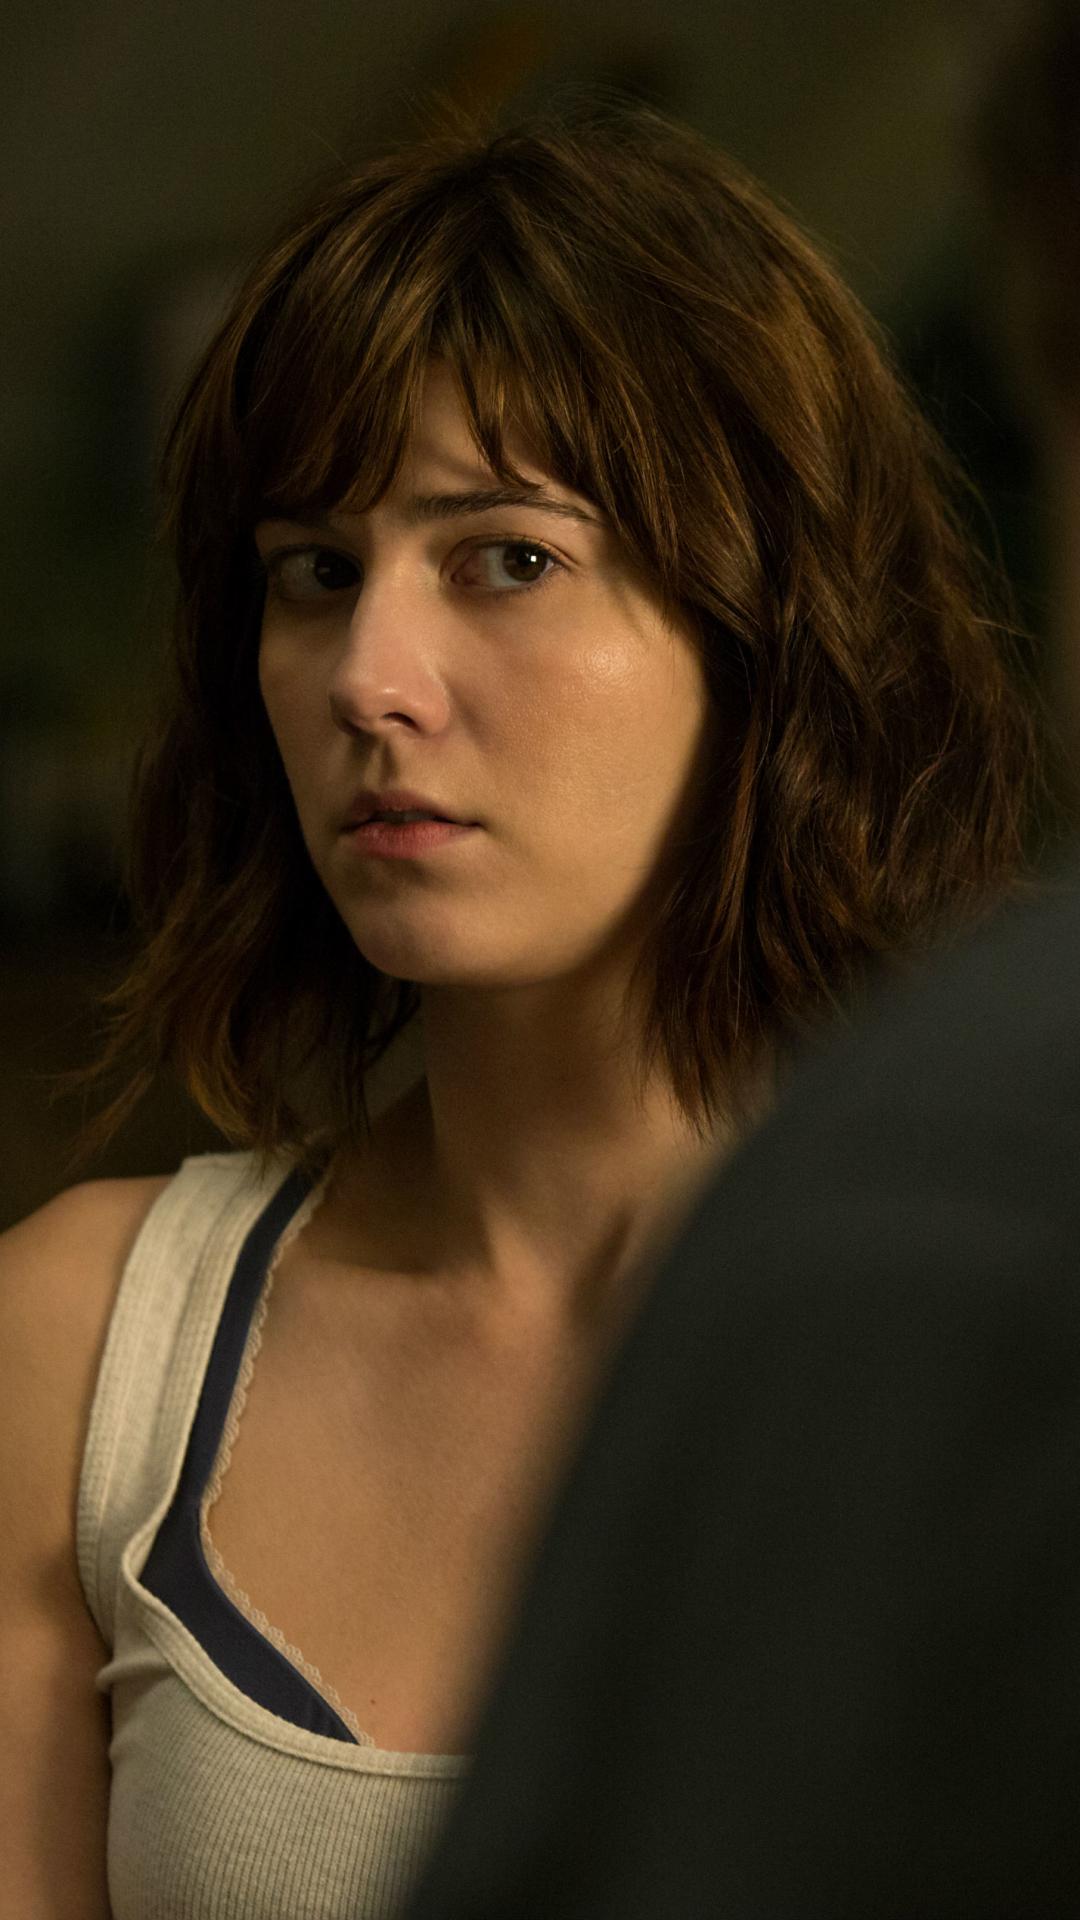 Mobile wallpaper: Movie, Mary Elizabeth Winstead, 10 Cloverfield Lane,  1373711 download the picture for free.